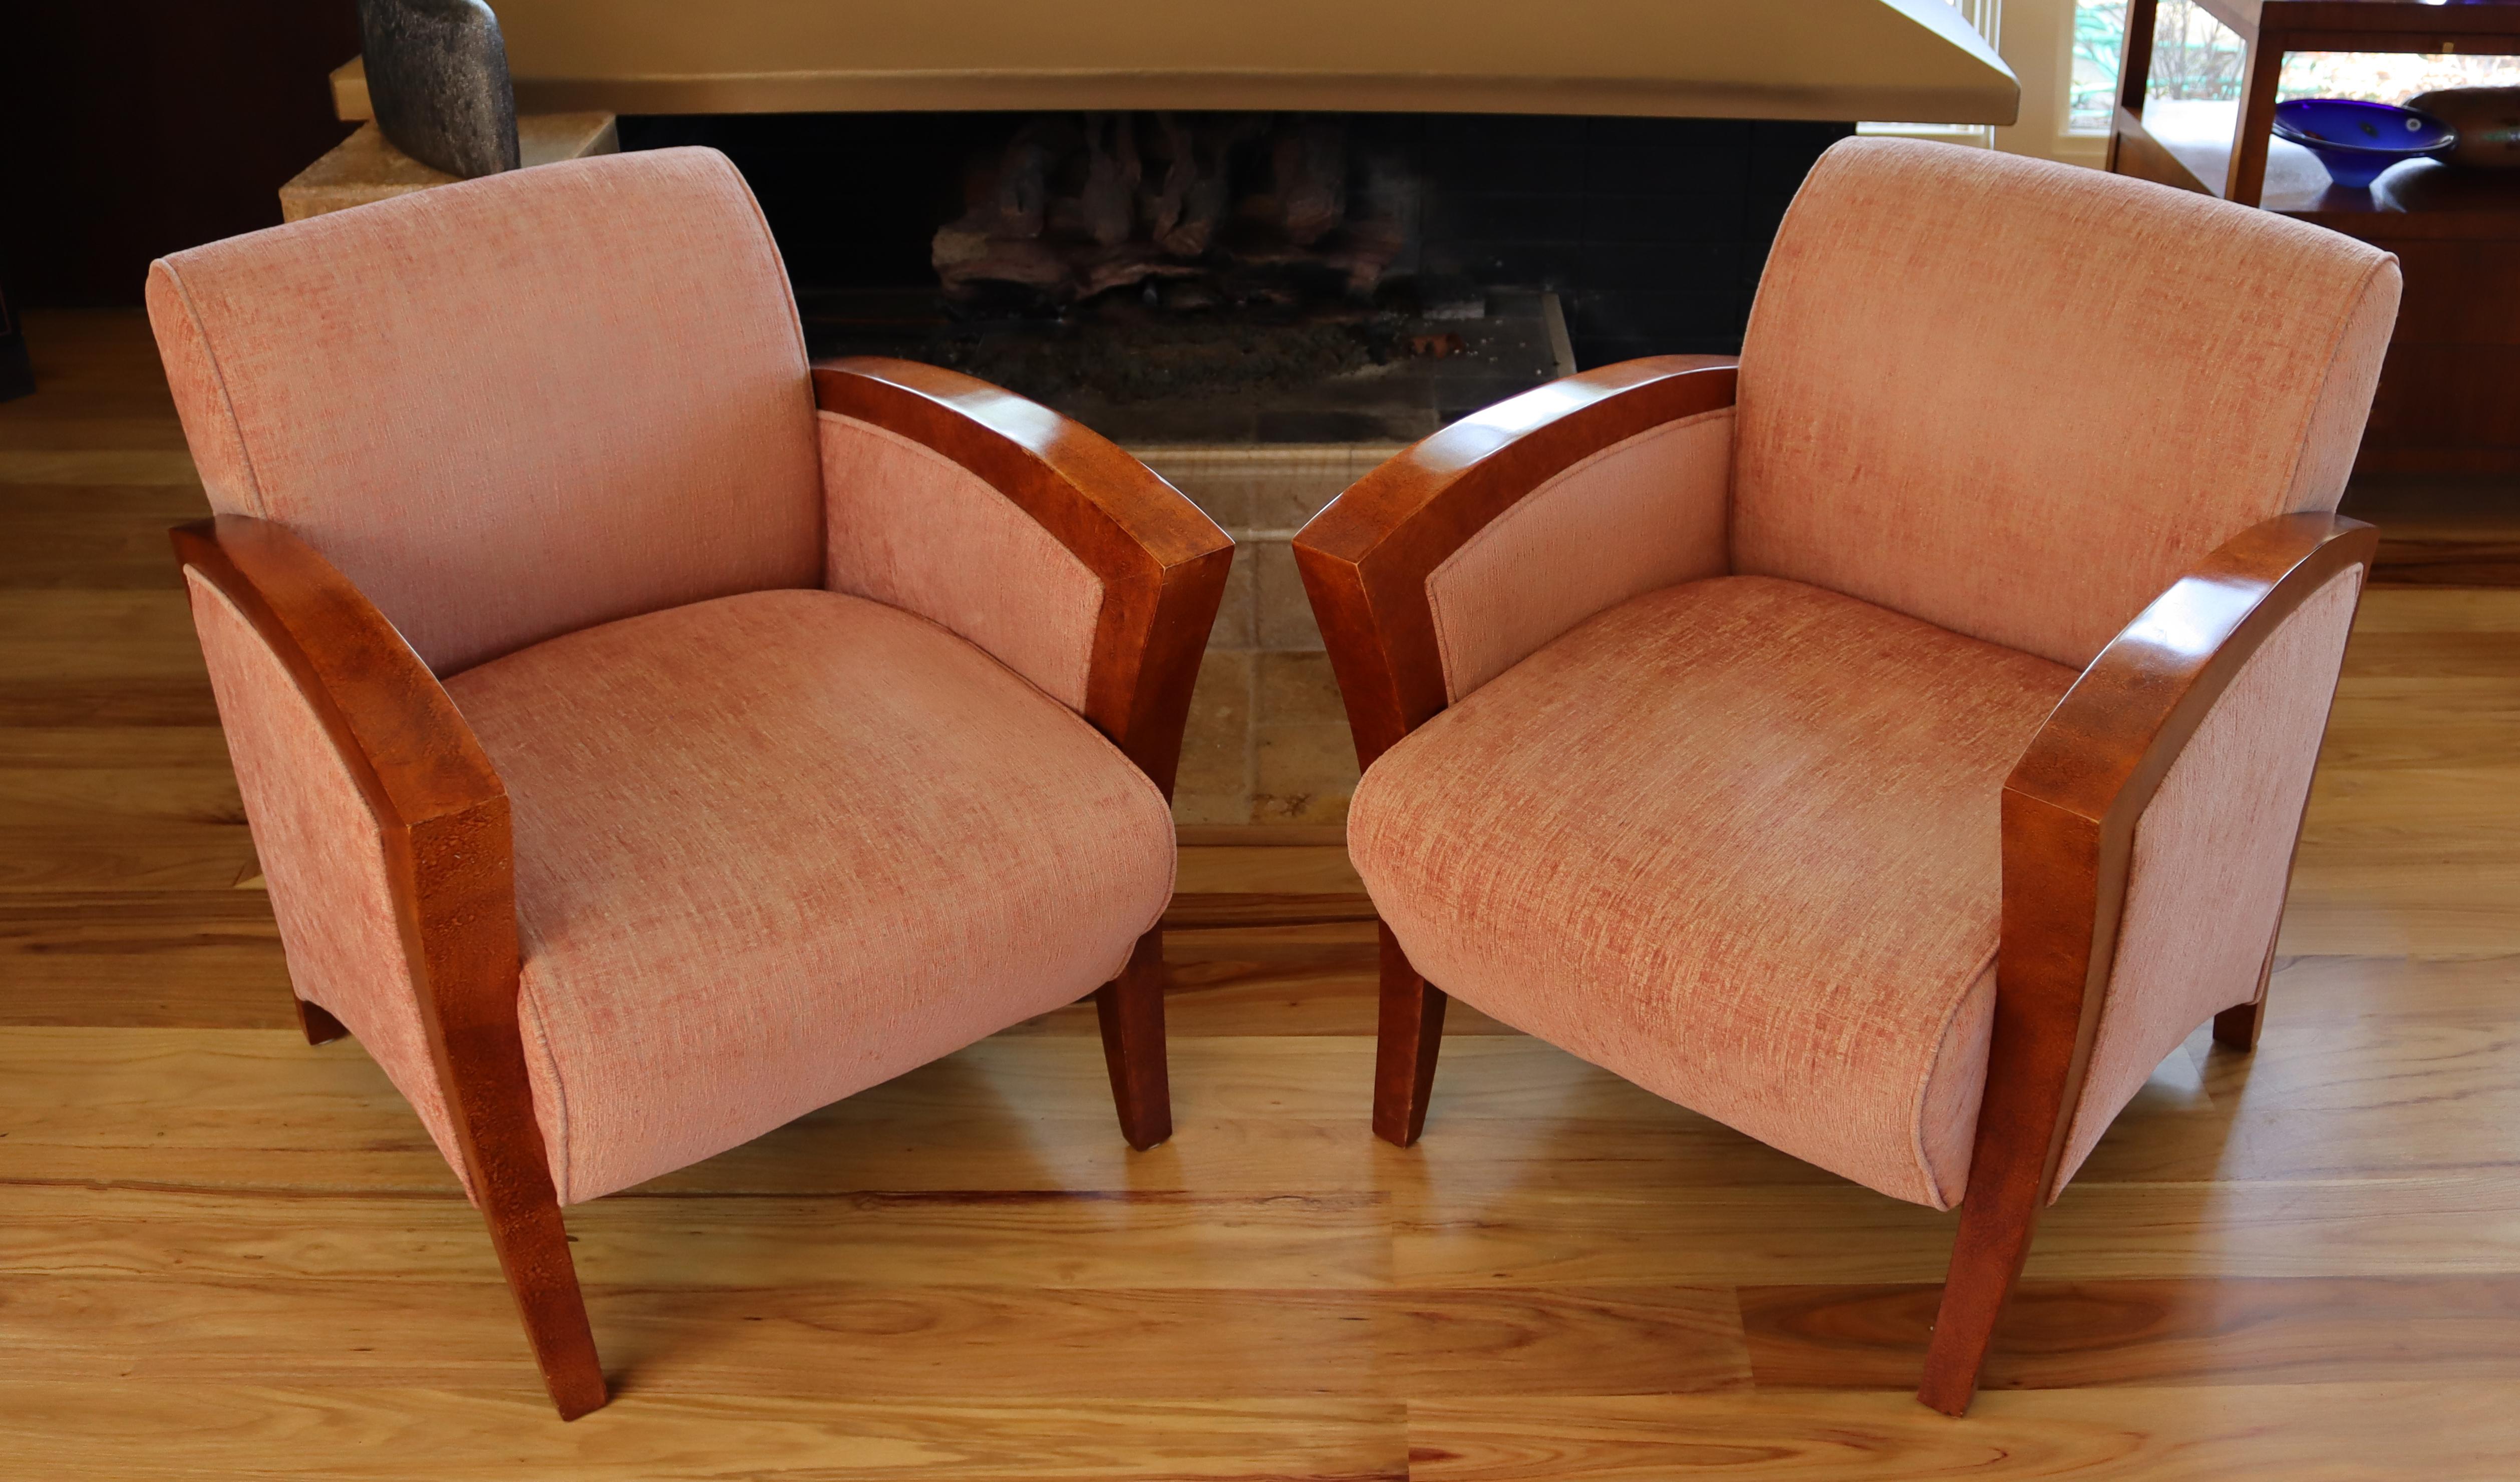 For your consideration is a gorgeous pair of club or lounge armchairs, on curved wood, in the Art Deco style. In excellent condition. The dimensions are 26.5